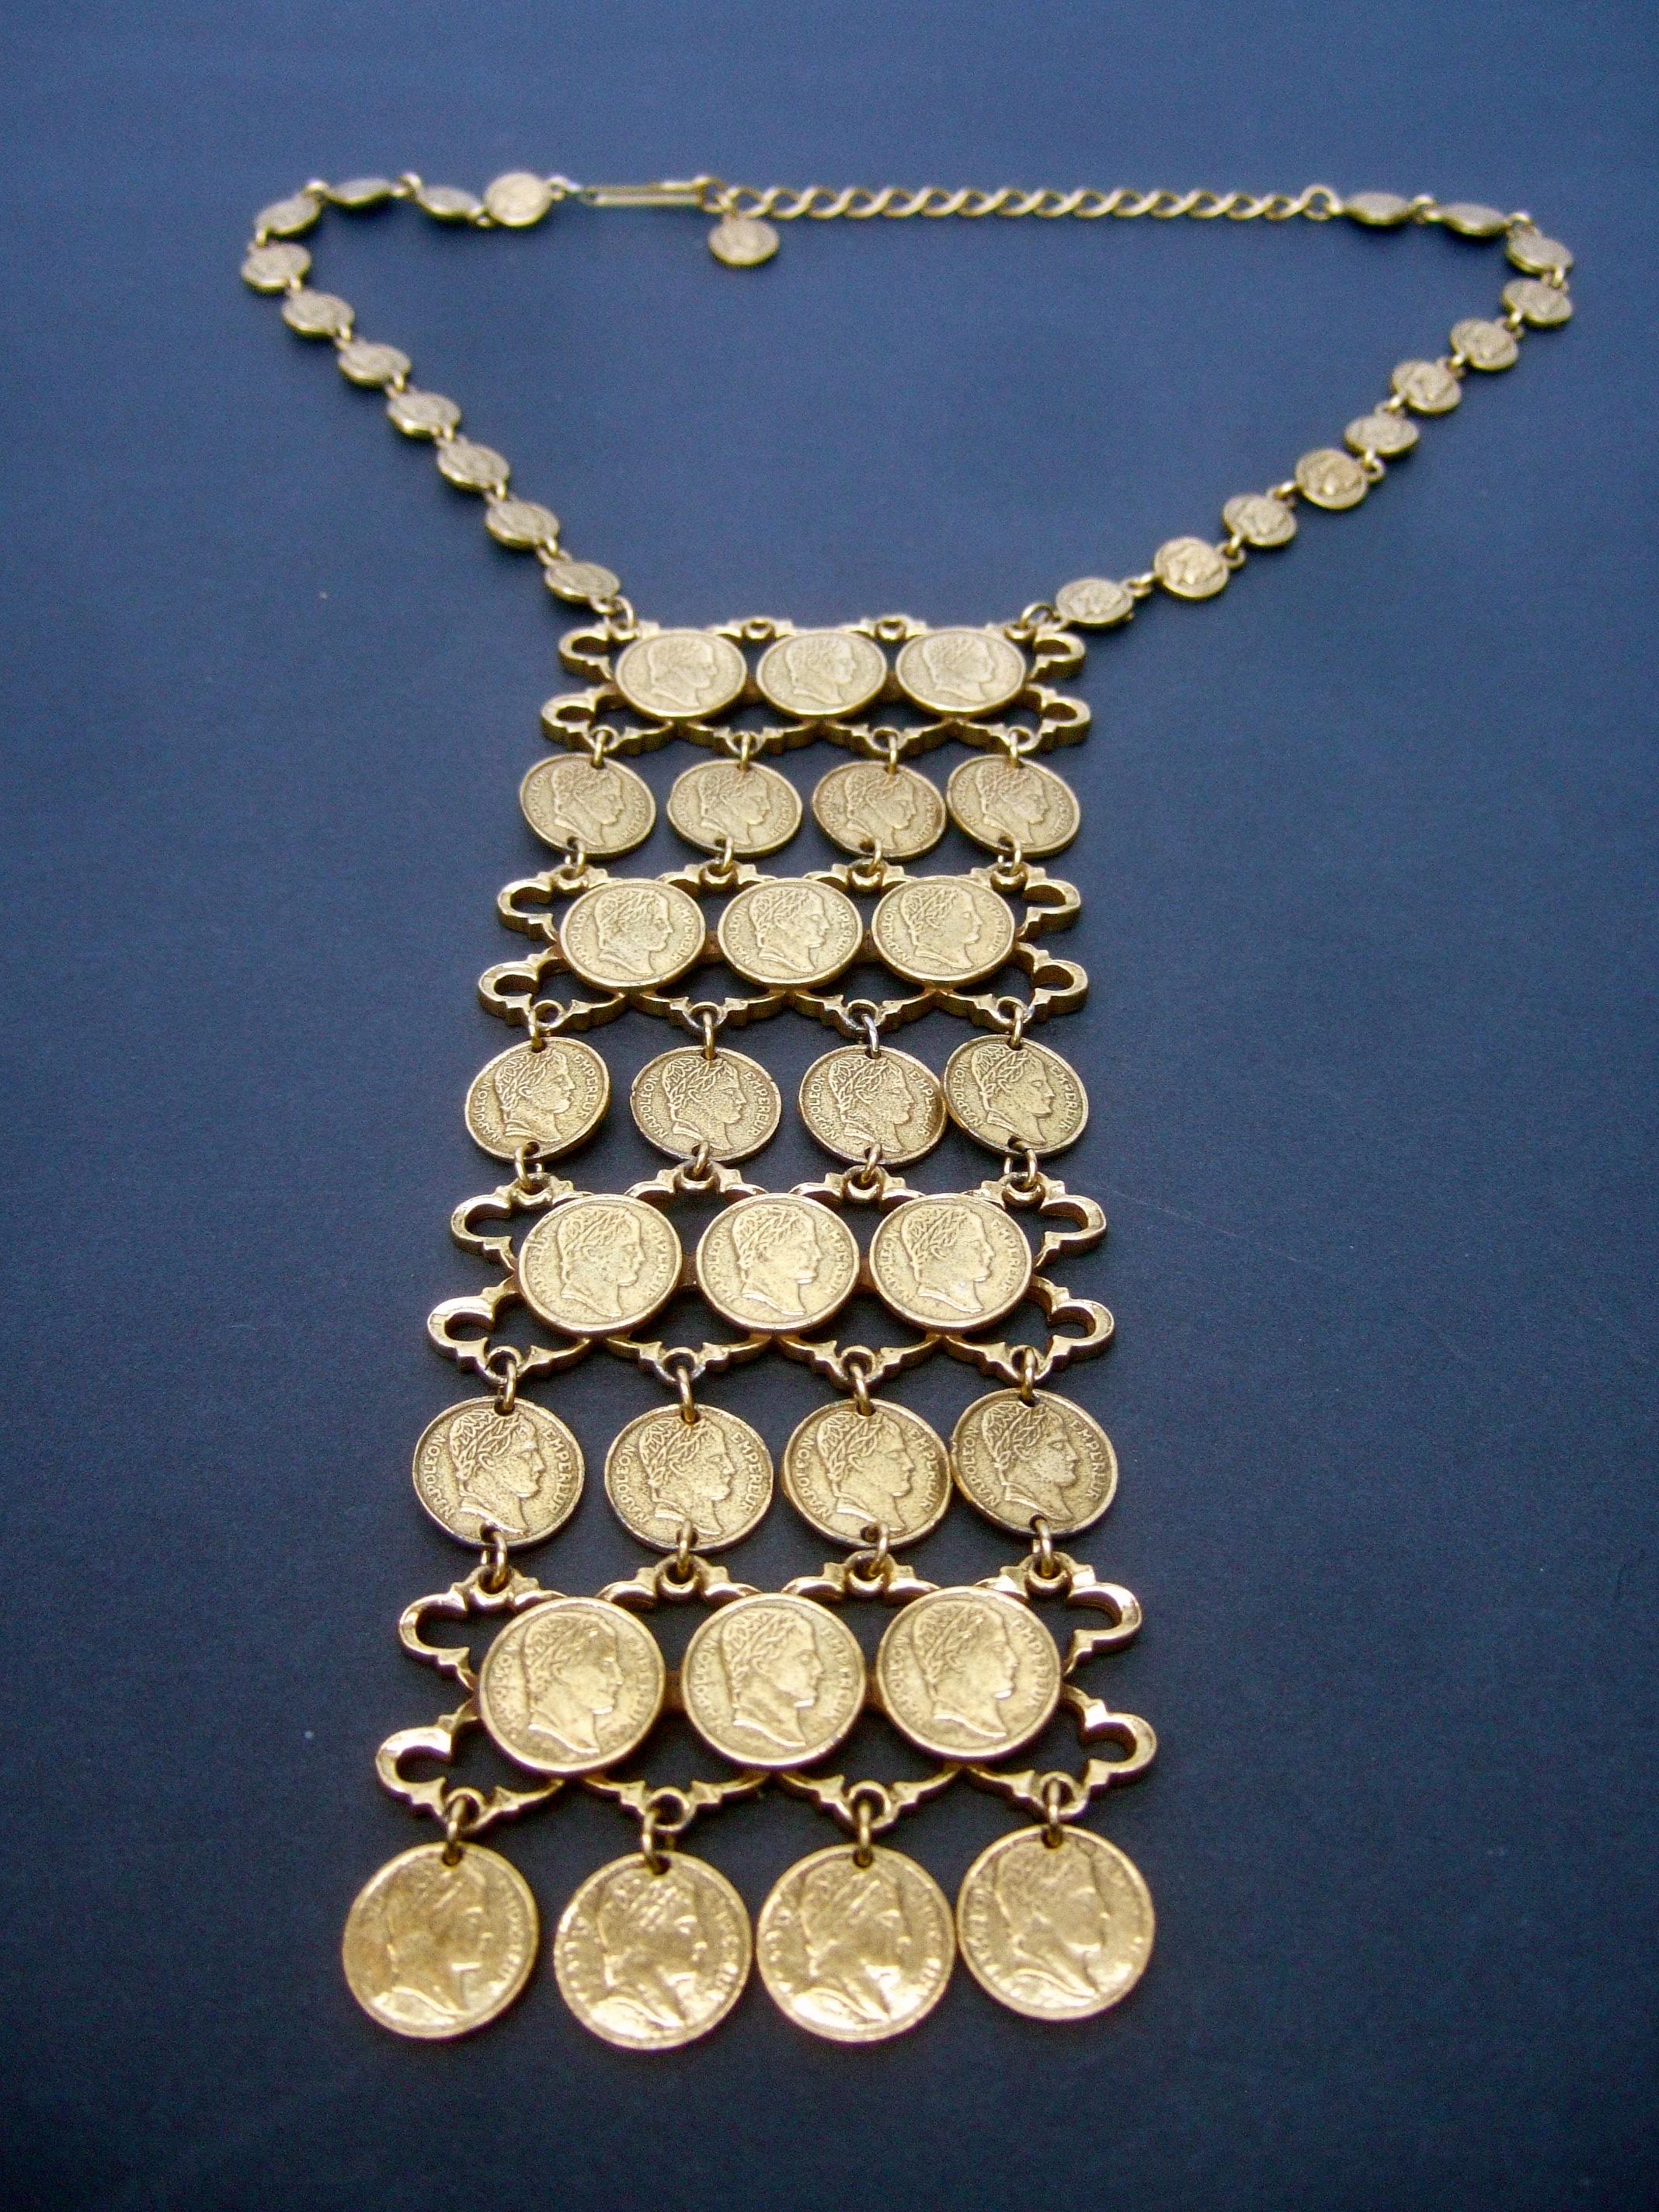 Massive Articulated Gilt Metal Coin Bib Necklace circa 1970s For Sale 9